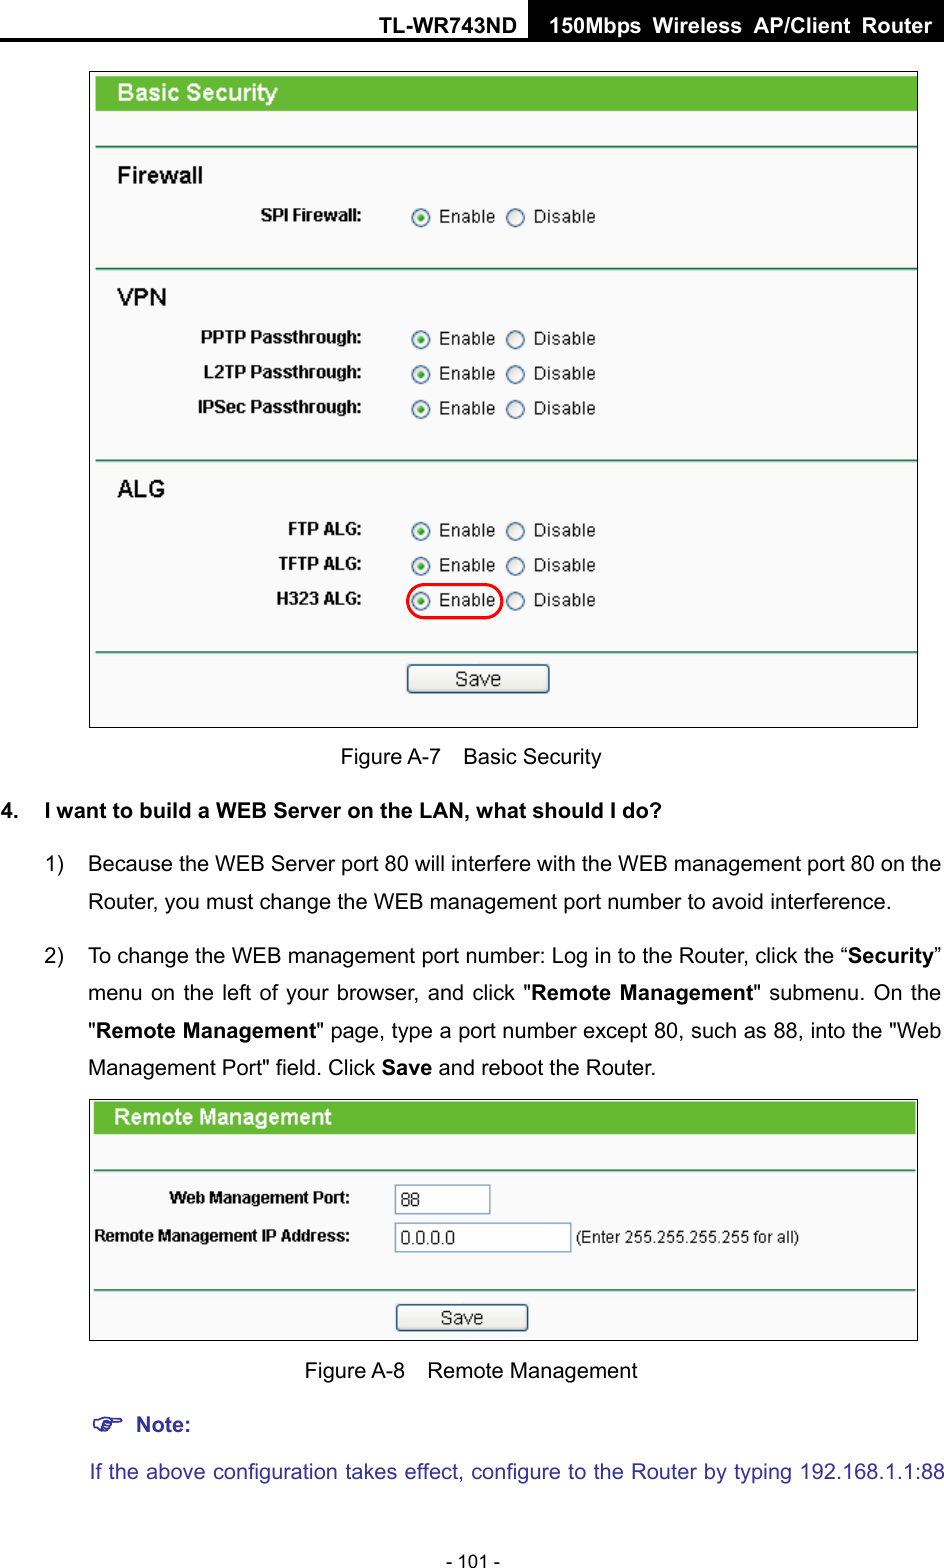 TL-WR743ND 150Mbps Wireless AP/Client Router - 101 -  Figure A-7  Basic Security 4.  I want to build a WEB Server on the LAN, what should I do? 1)  Because the WEB Server port 80 will interfere with the WEB management port 80 on the Router, you must change the WEB management port number to avoid interference. 2)  To change the WEB management port number: Log in to the Router, click the “Security” menu on the left of your browser, and click &quot;Remote Management&quot; submenu. On the &quot;Remote Management&quot; page, type a port number except 80, such as 88, into the &quot;Web Management Port&quot; field. Click Save and reboot the Router.  Figure A-8  Remote Management ) Note: If the above configuration takes effect, configure to the Router by typing 192.168.1.1:88 